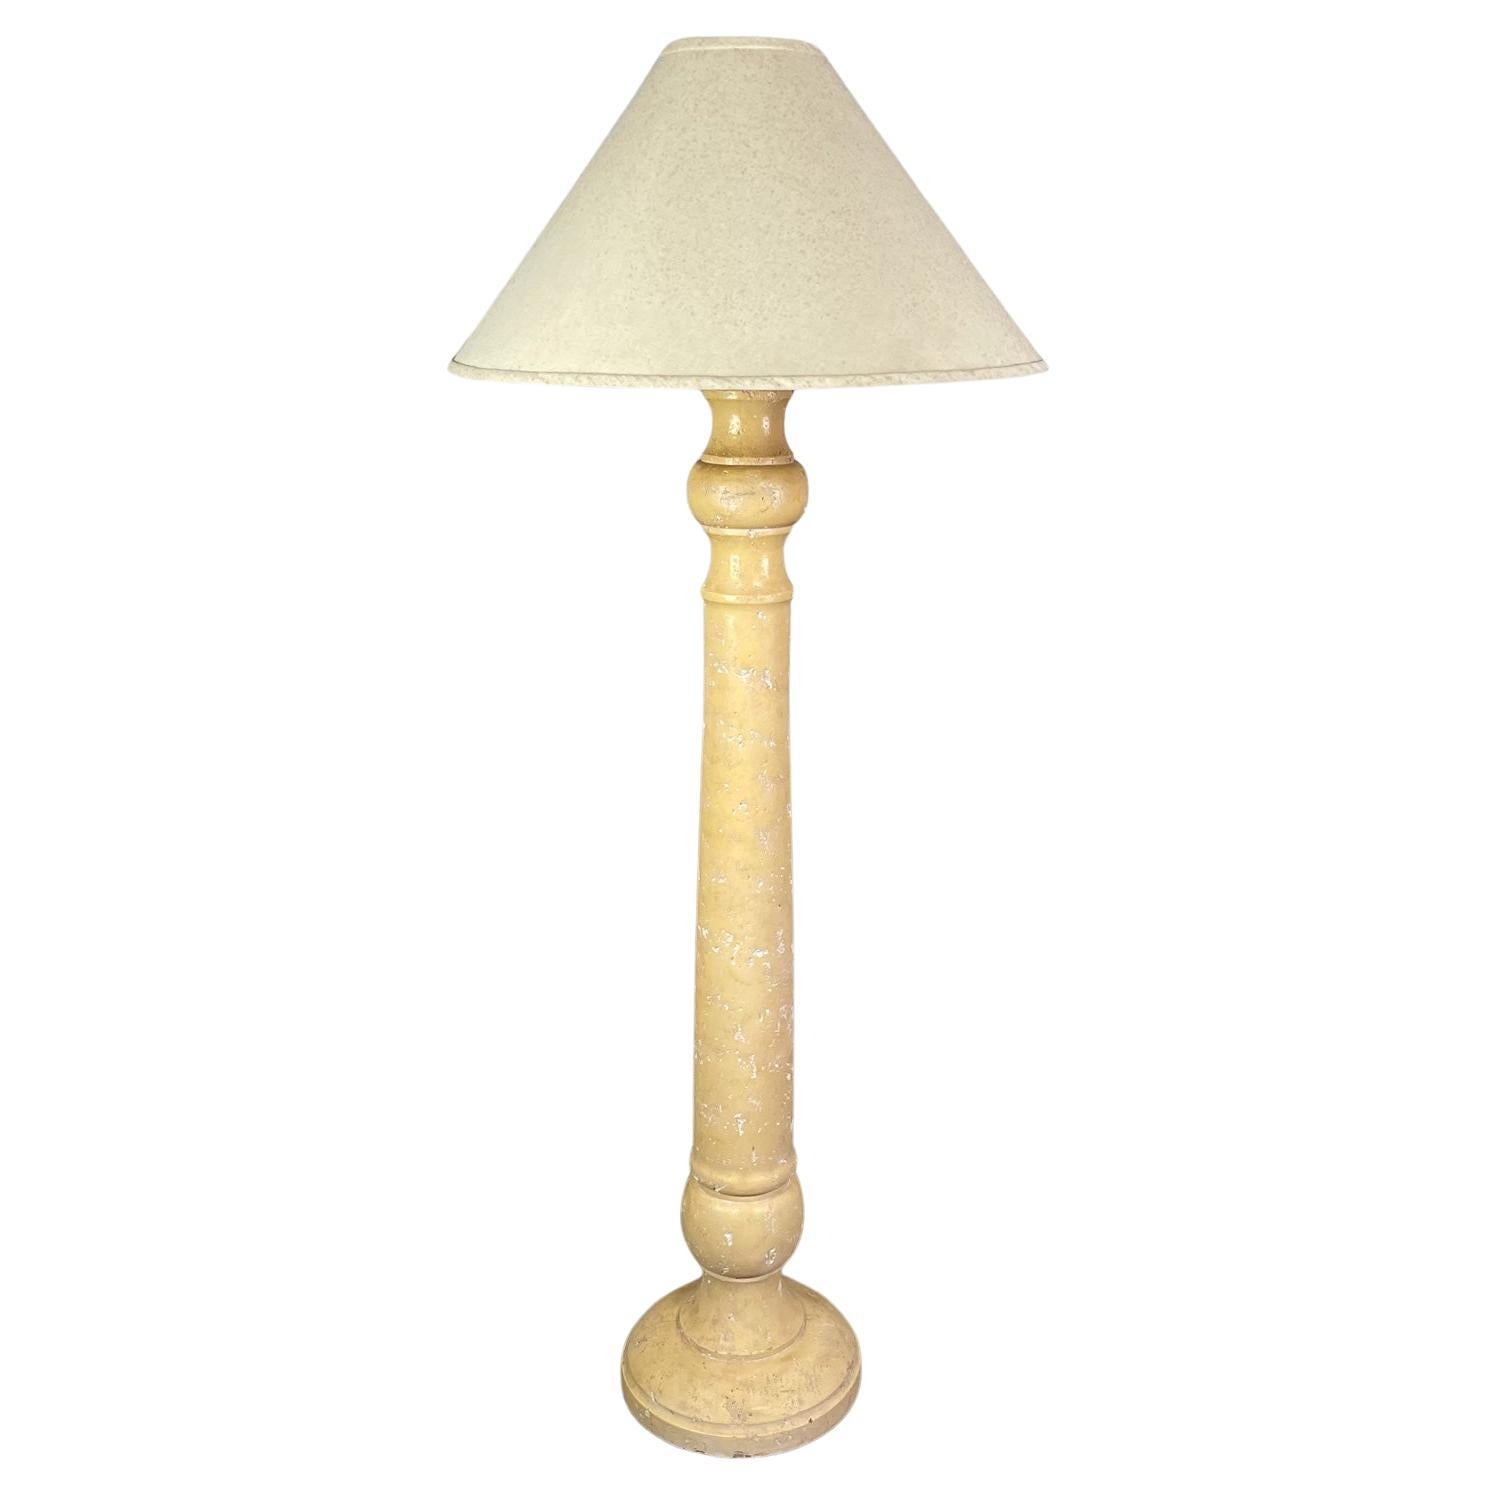 Late 20th Column Floor Lamp Faux Travertine Plaster Finish & Orig Coolie Shade For Sale